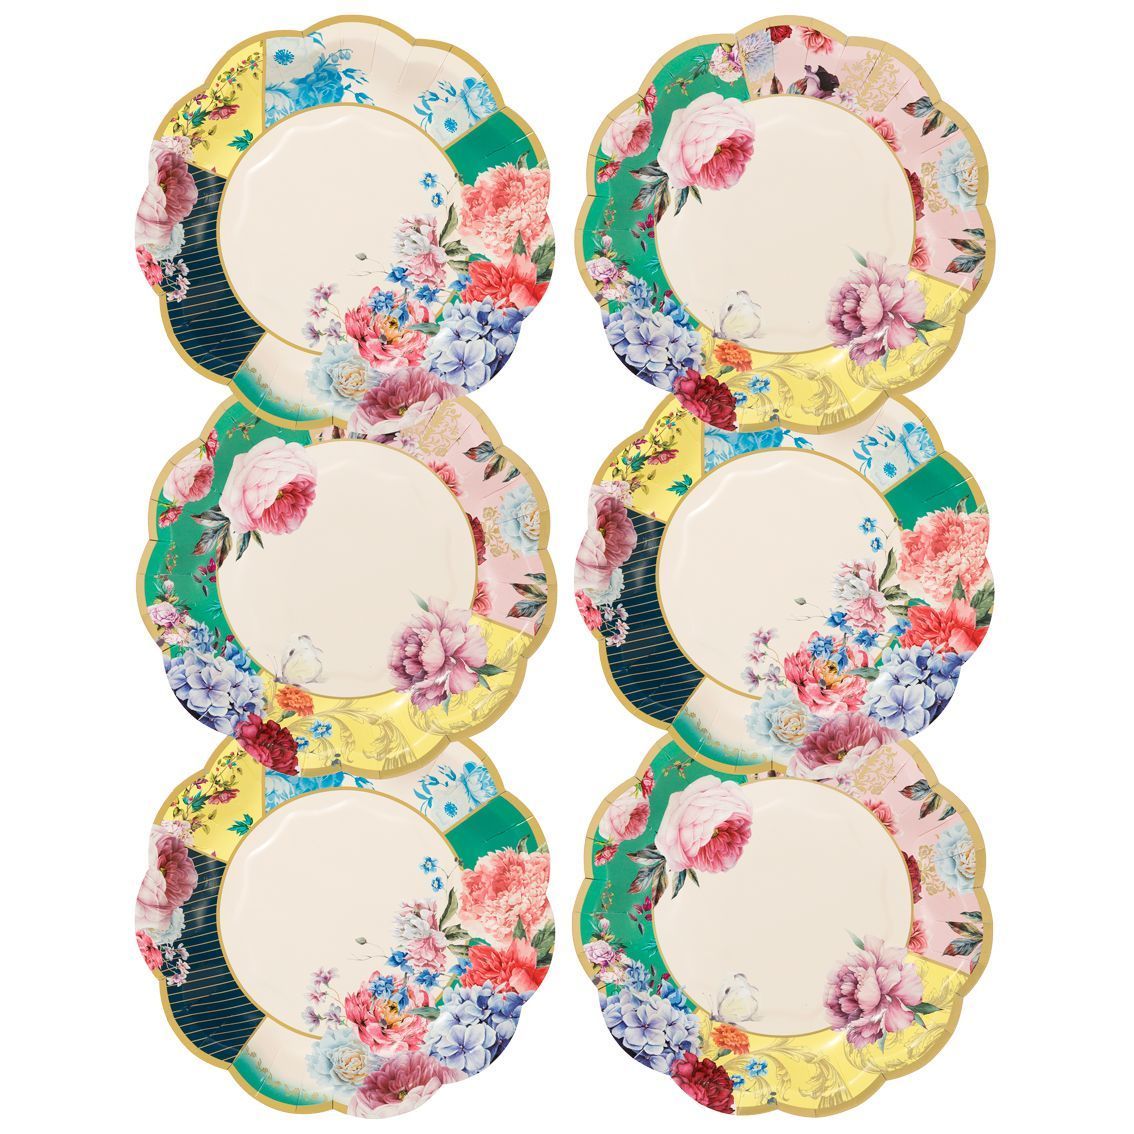 Truly Scrumptious Vintage Inspired Small Paper Plates